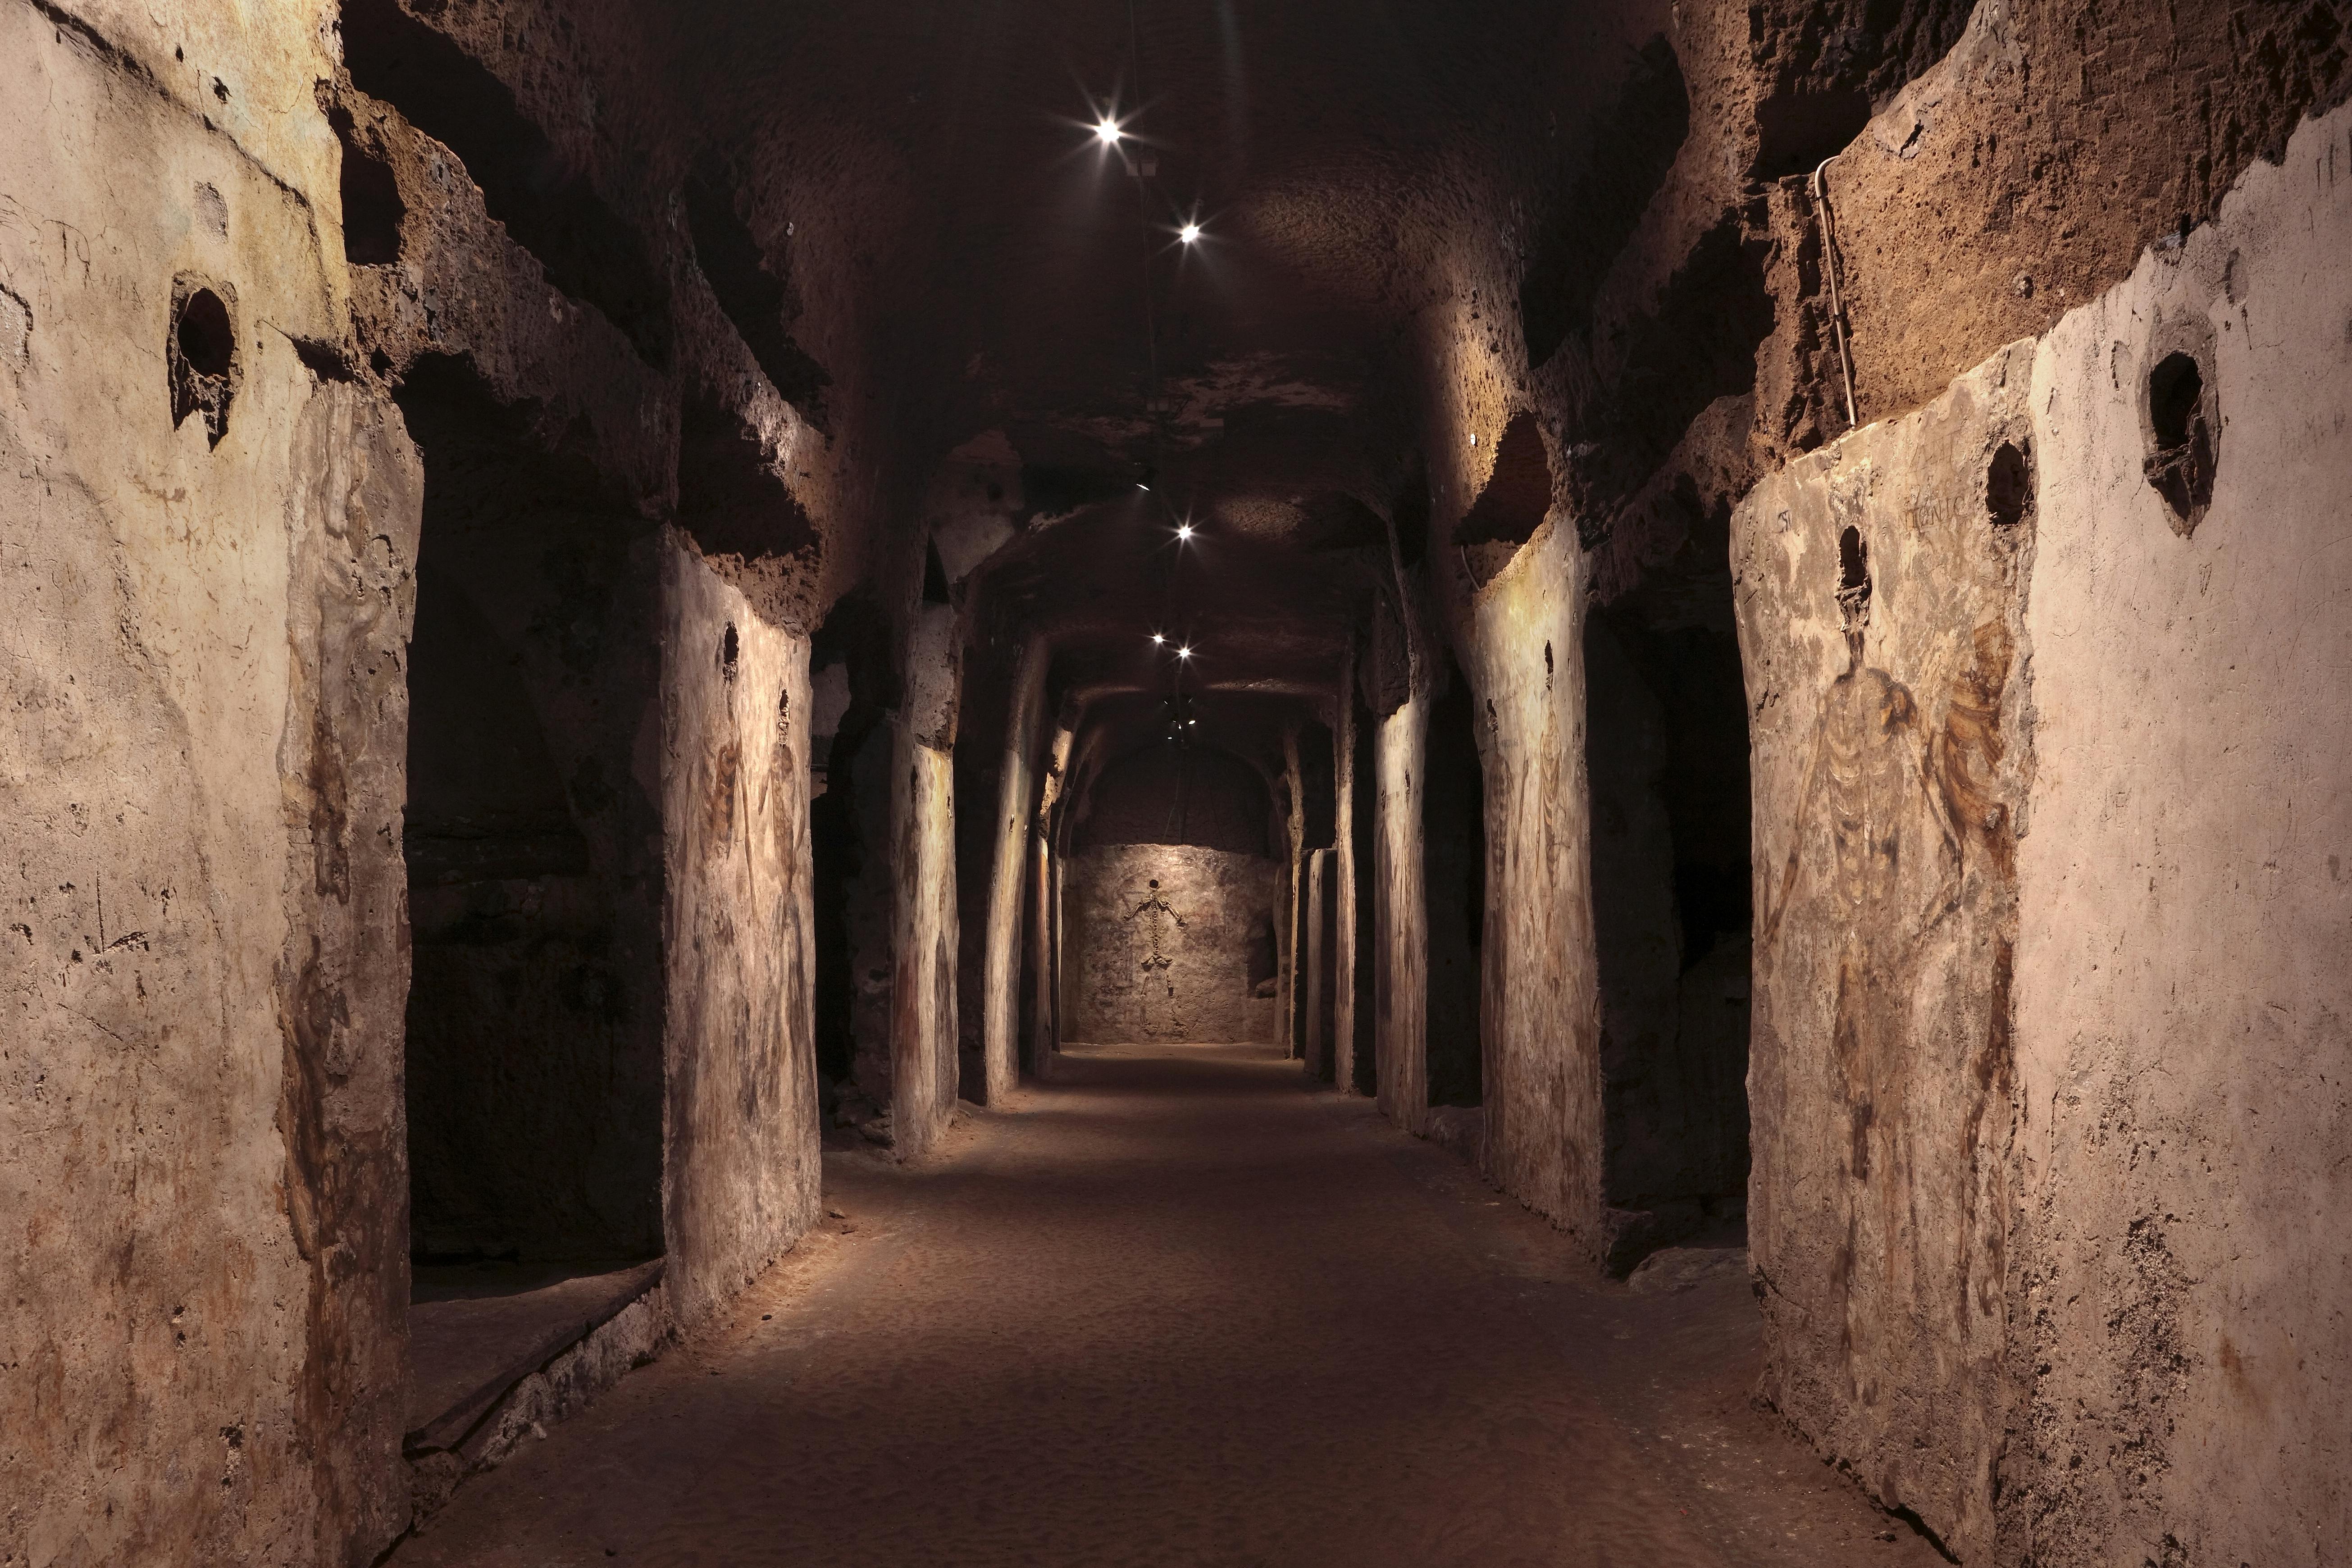 Catacombs of San Gaudioso tickets and guided tour